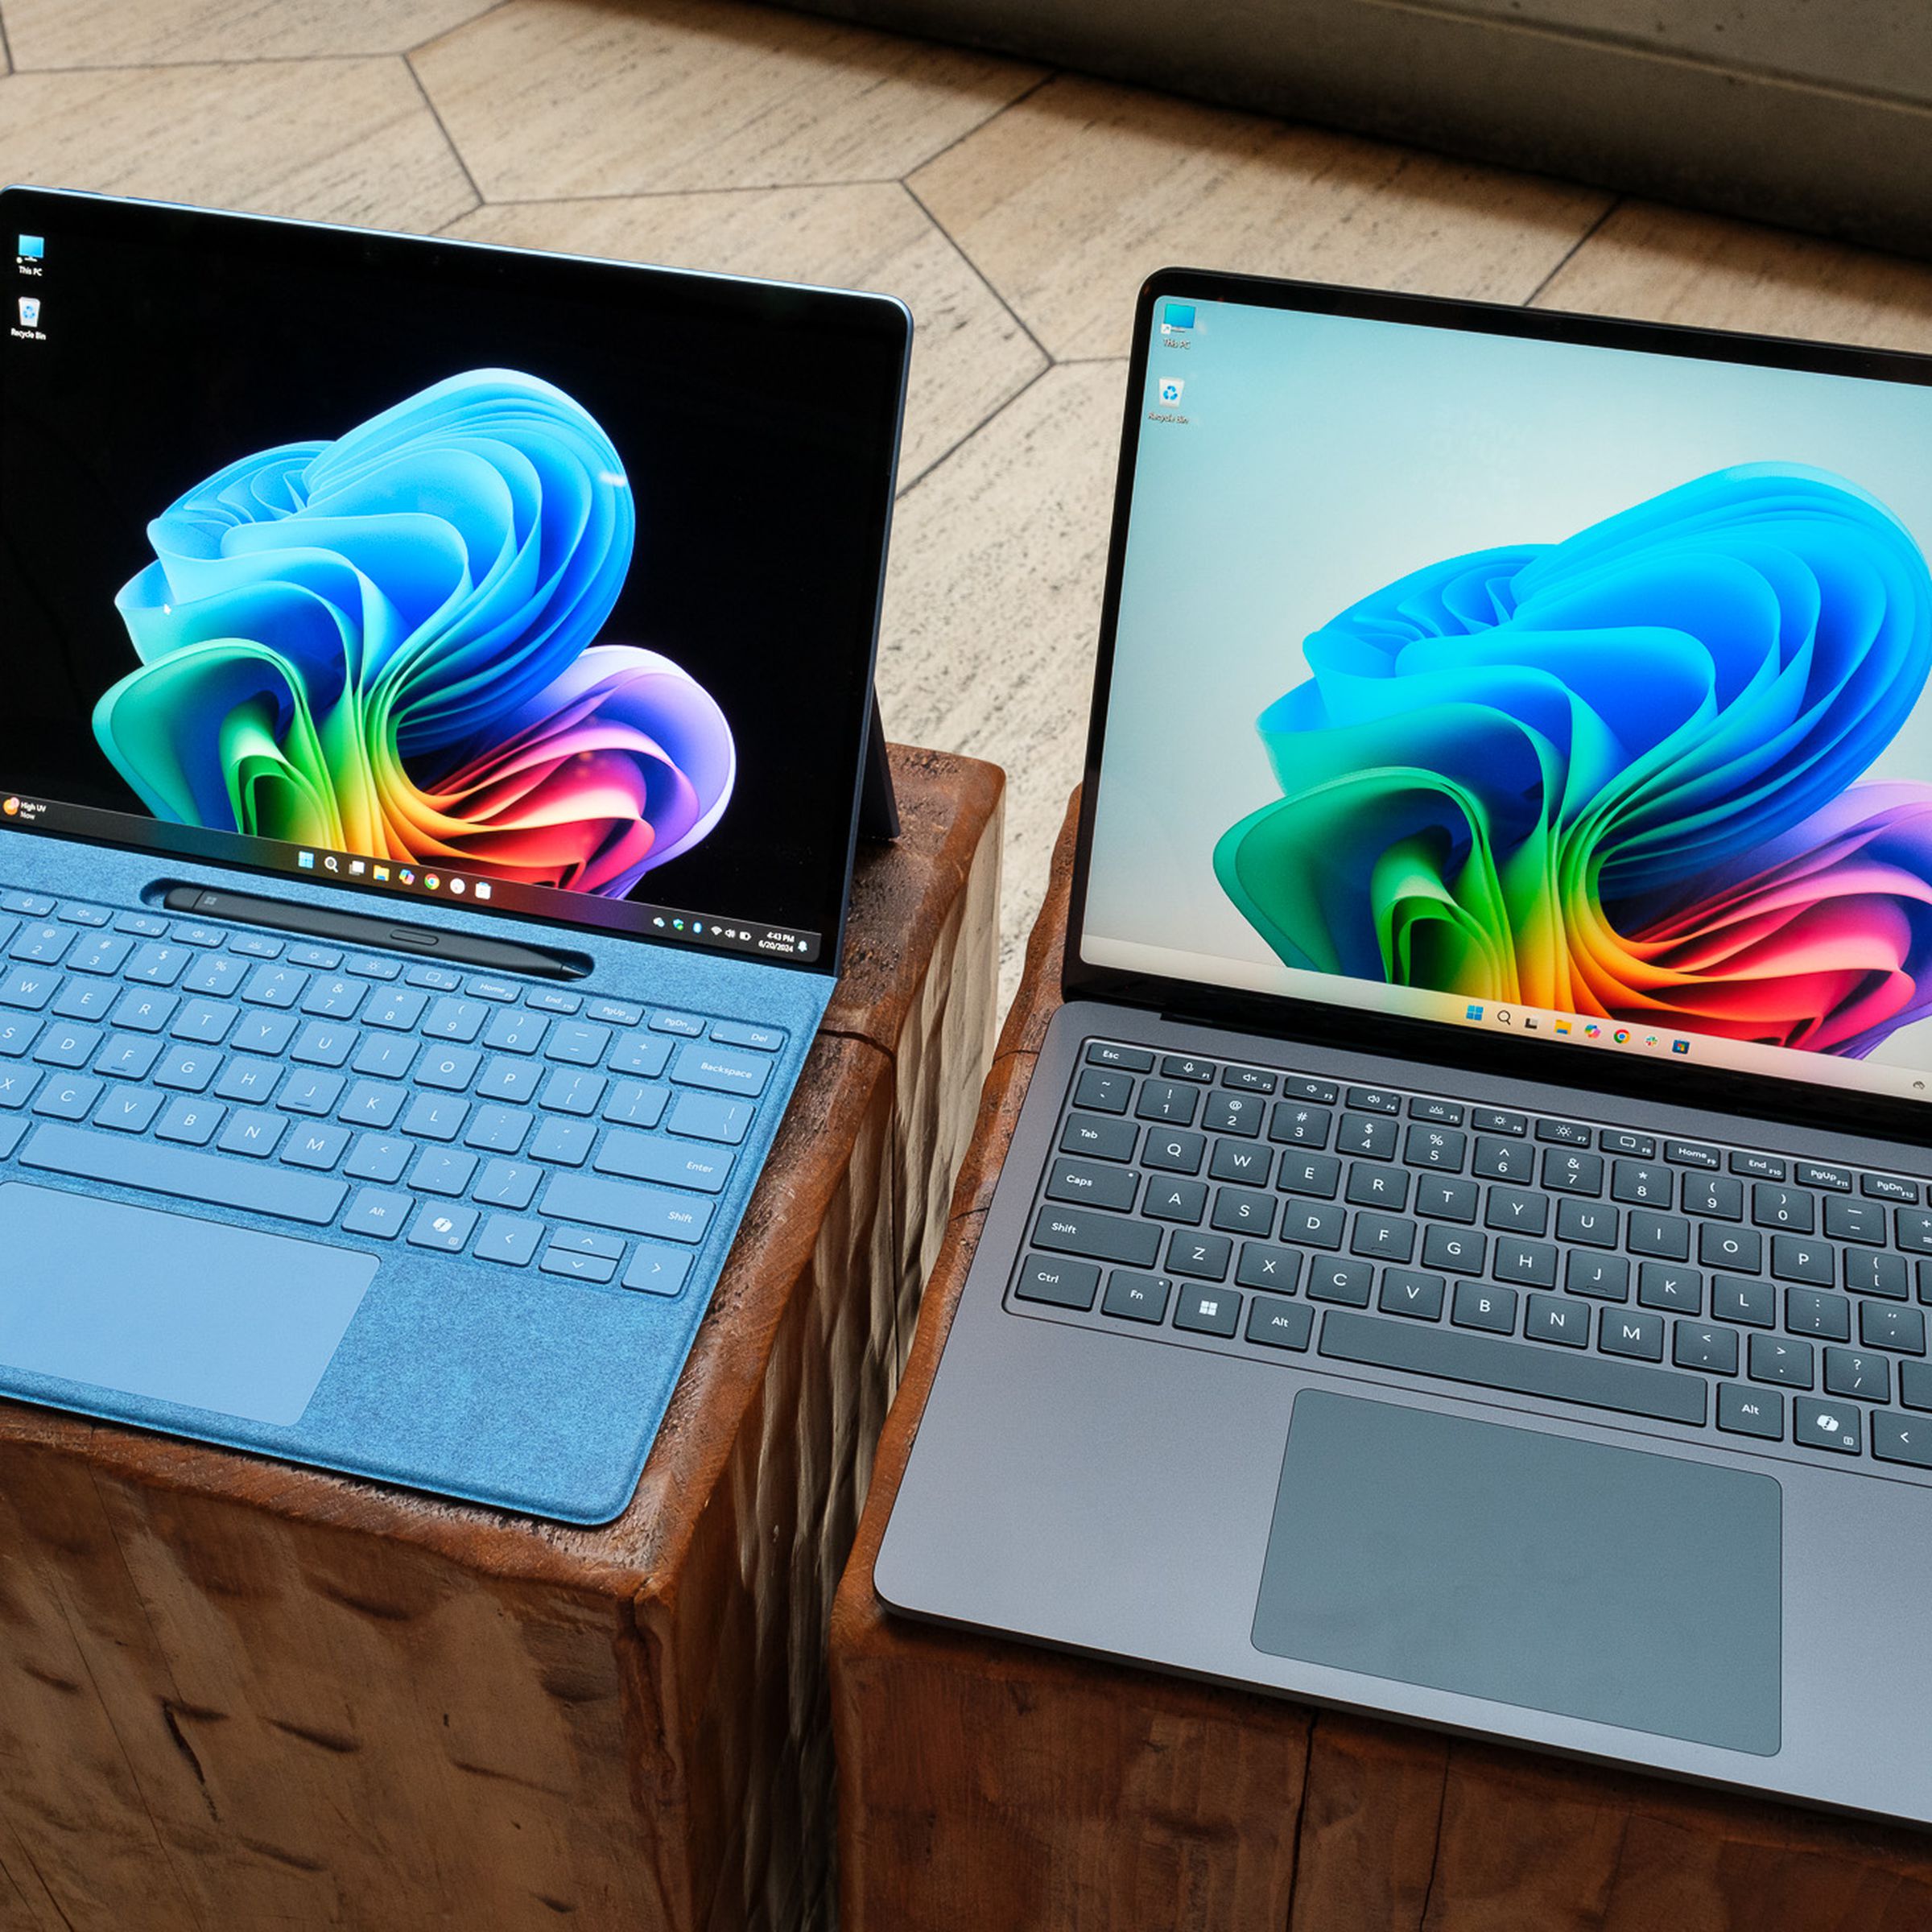 A hands-on photo of Microsoft’s 13.8-inch Surface Laptop.